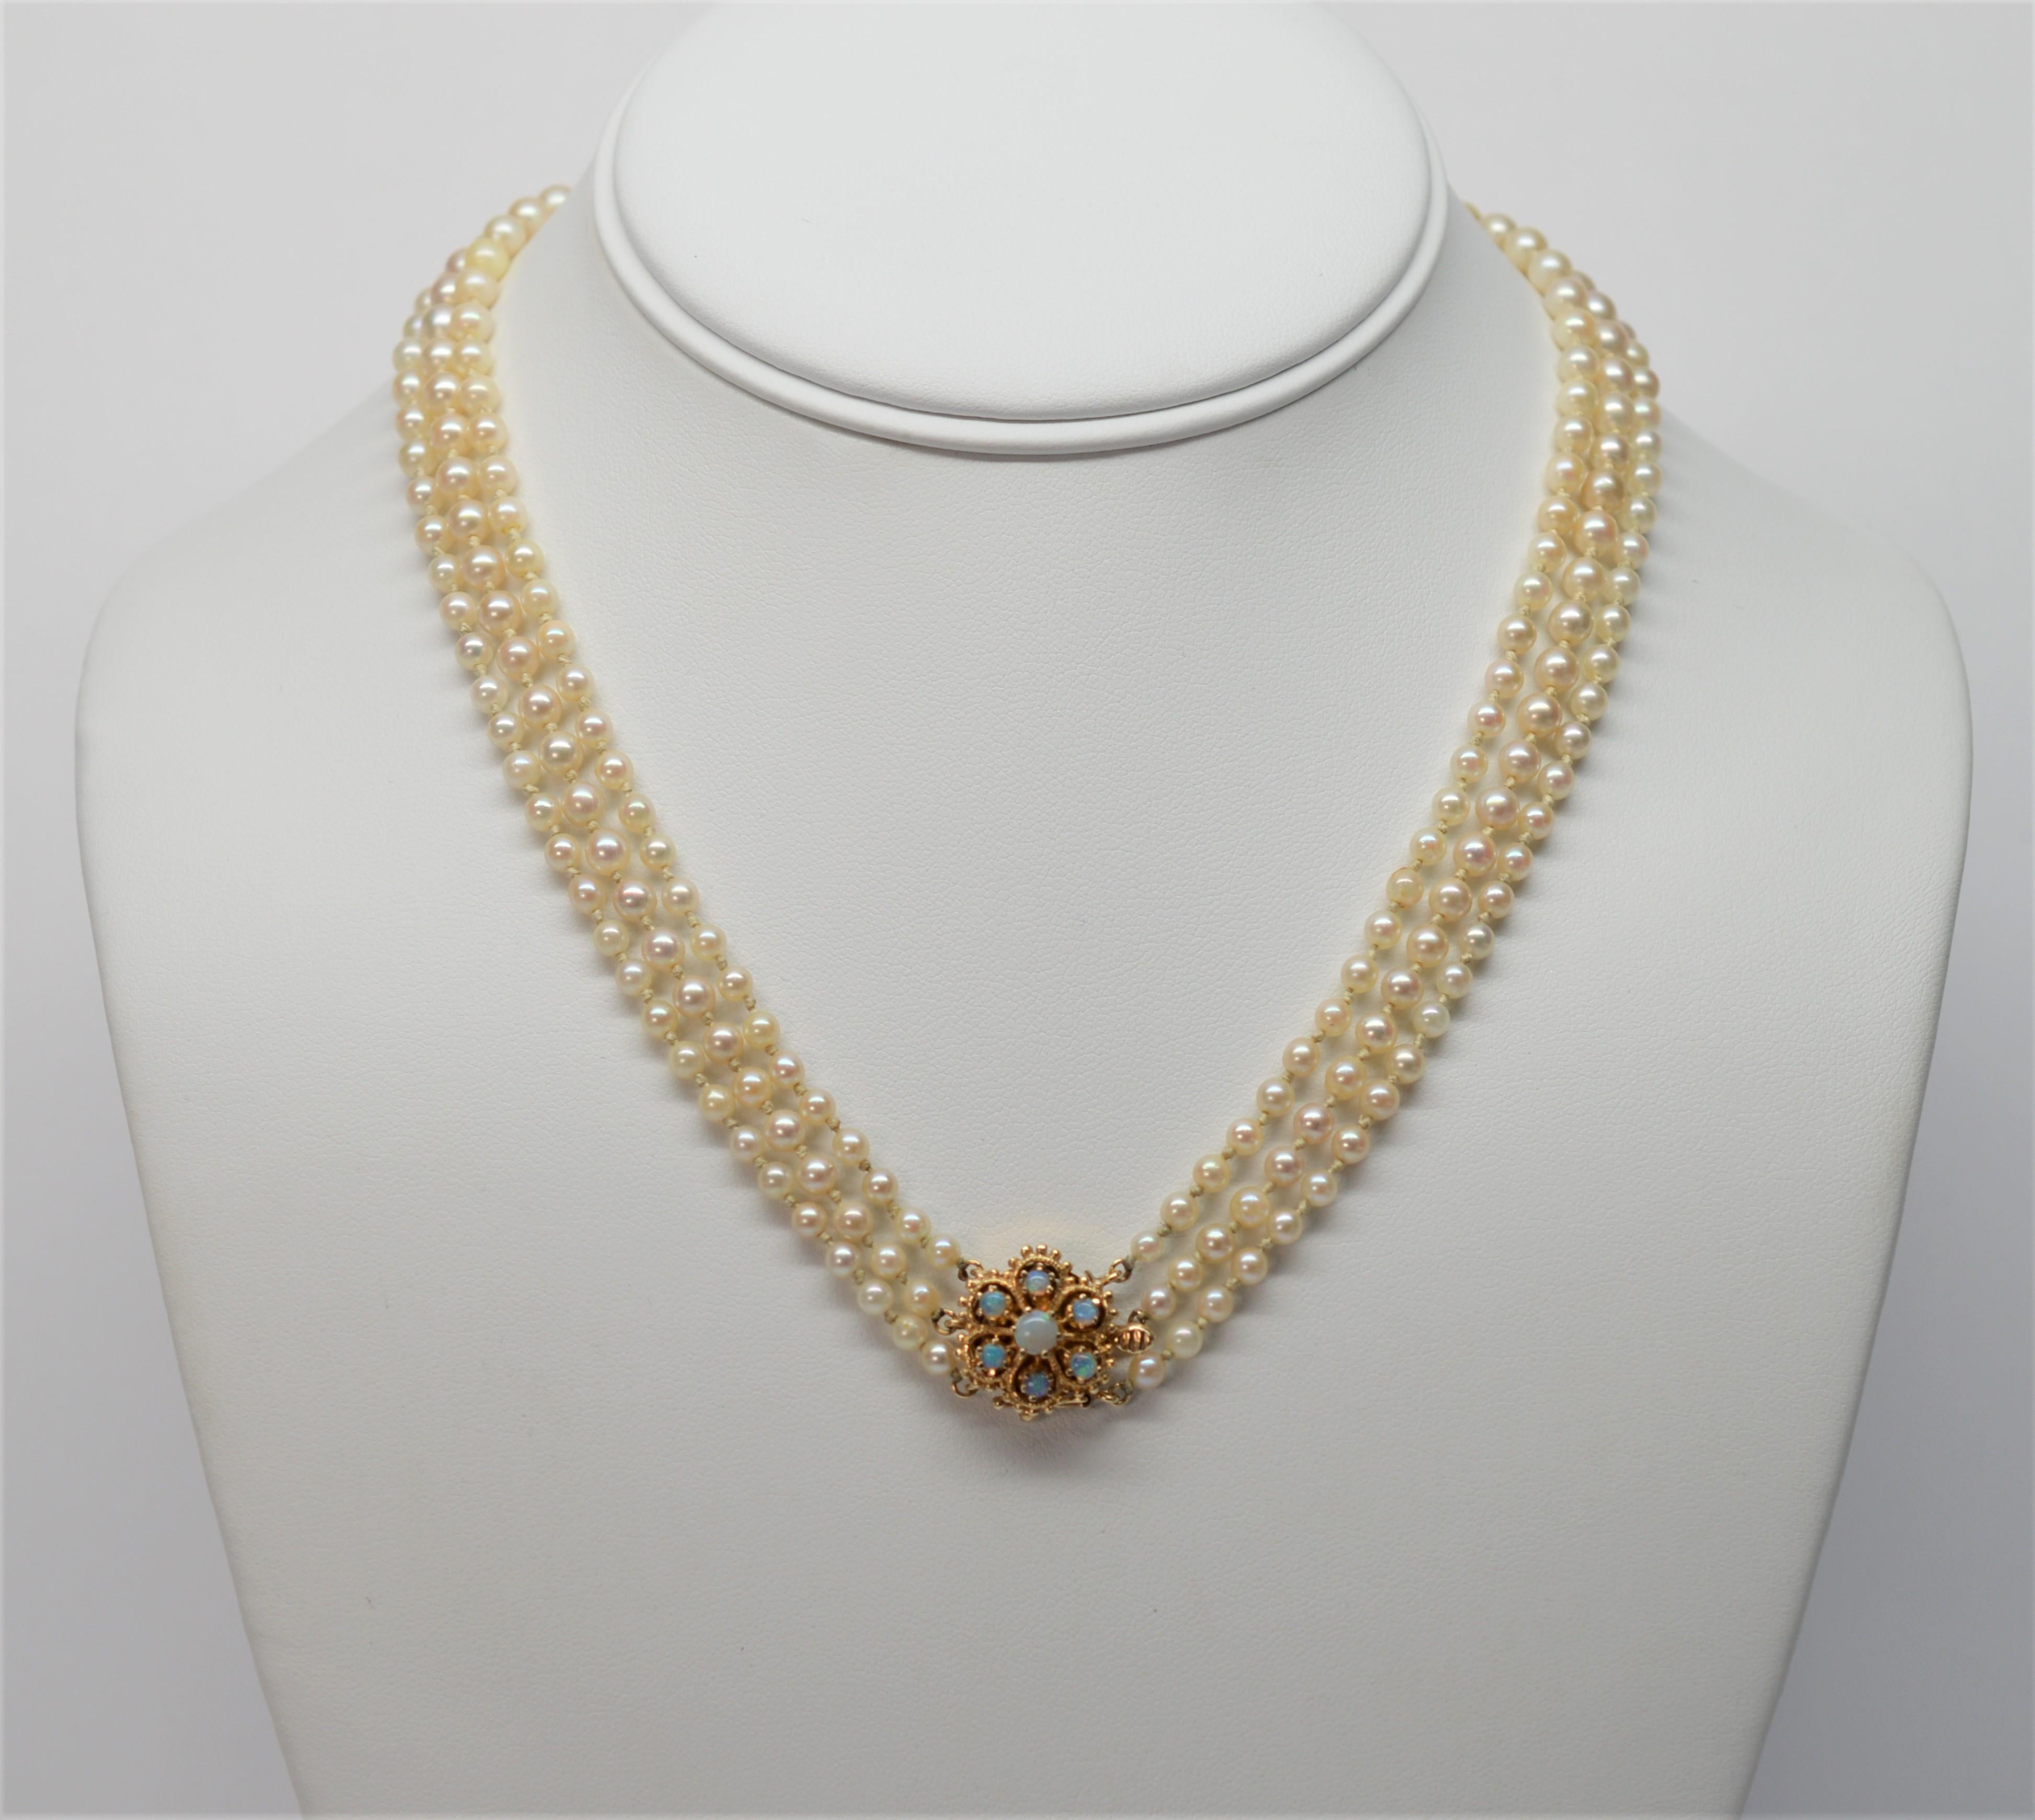 Triple Strand Akoya Pearl Necklace with 14K Yellow Gold & Opal Clasp 1